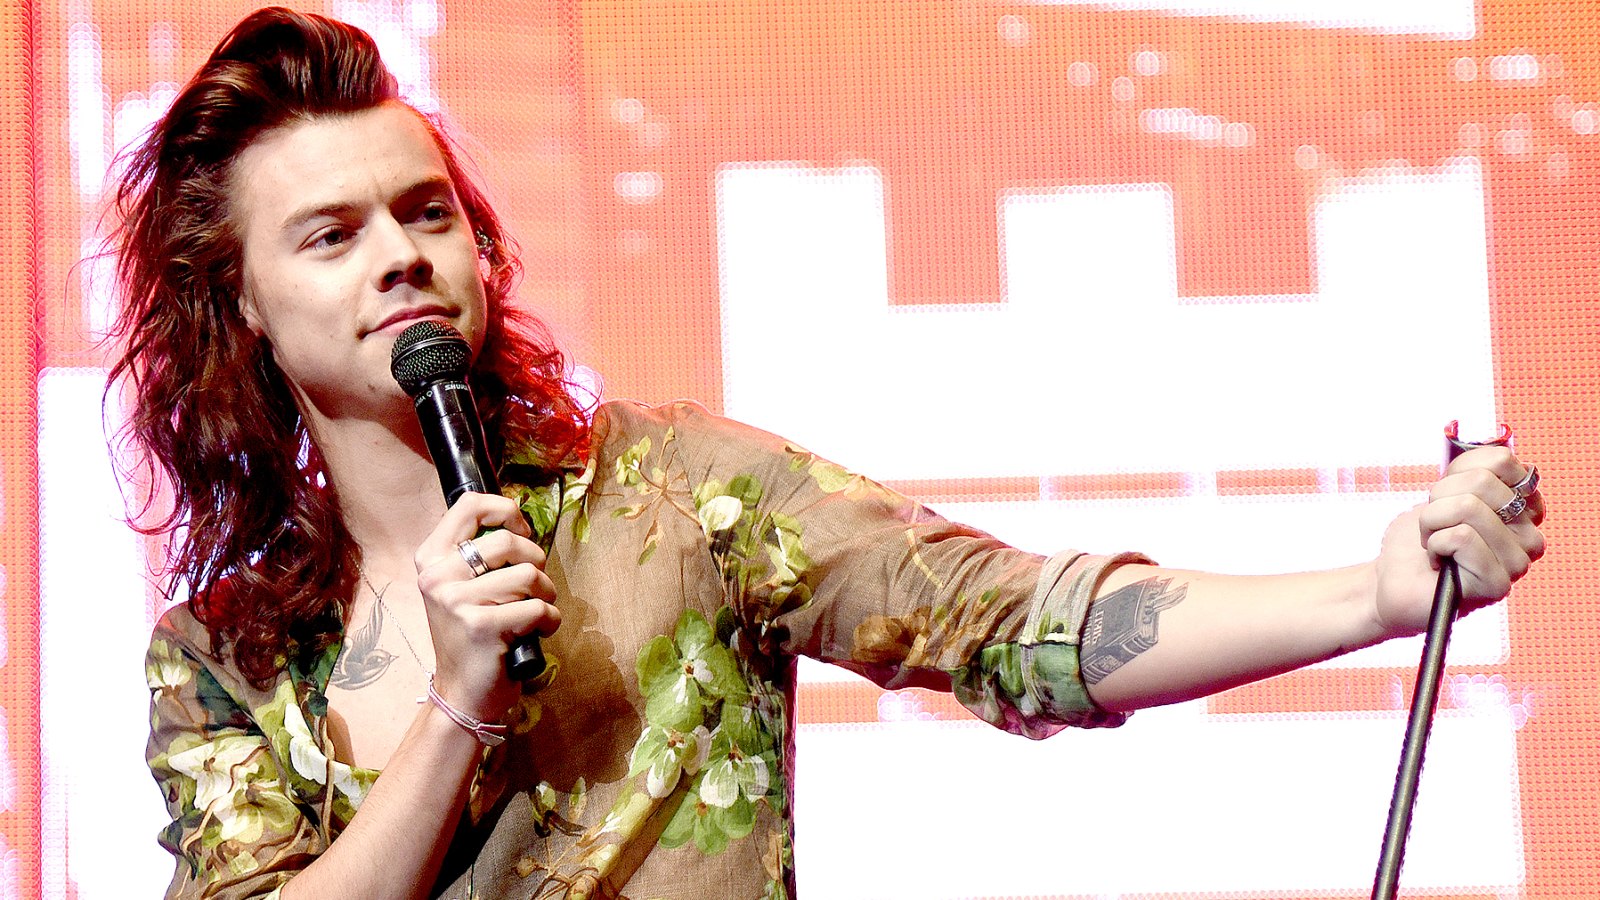 Harry Styles Cuts Long Hair for Charity